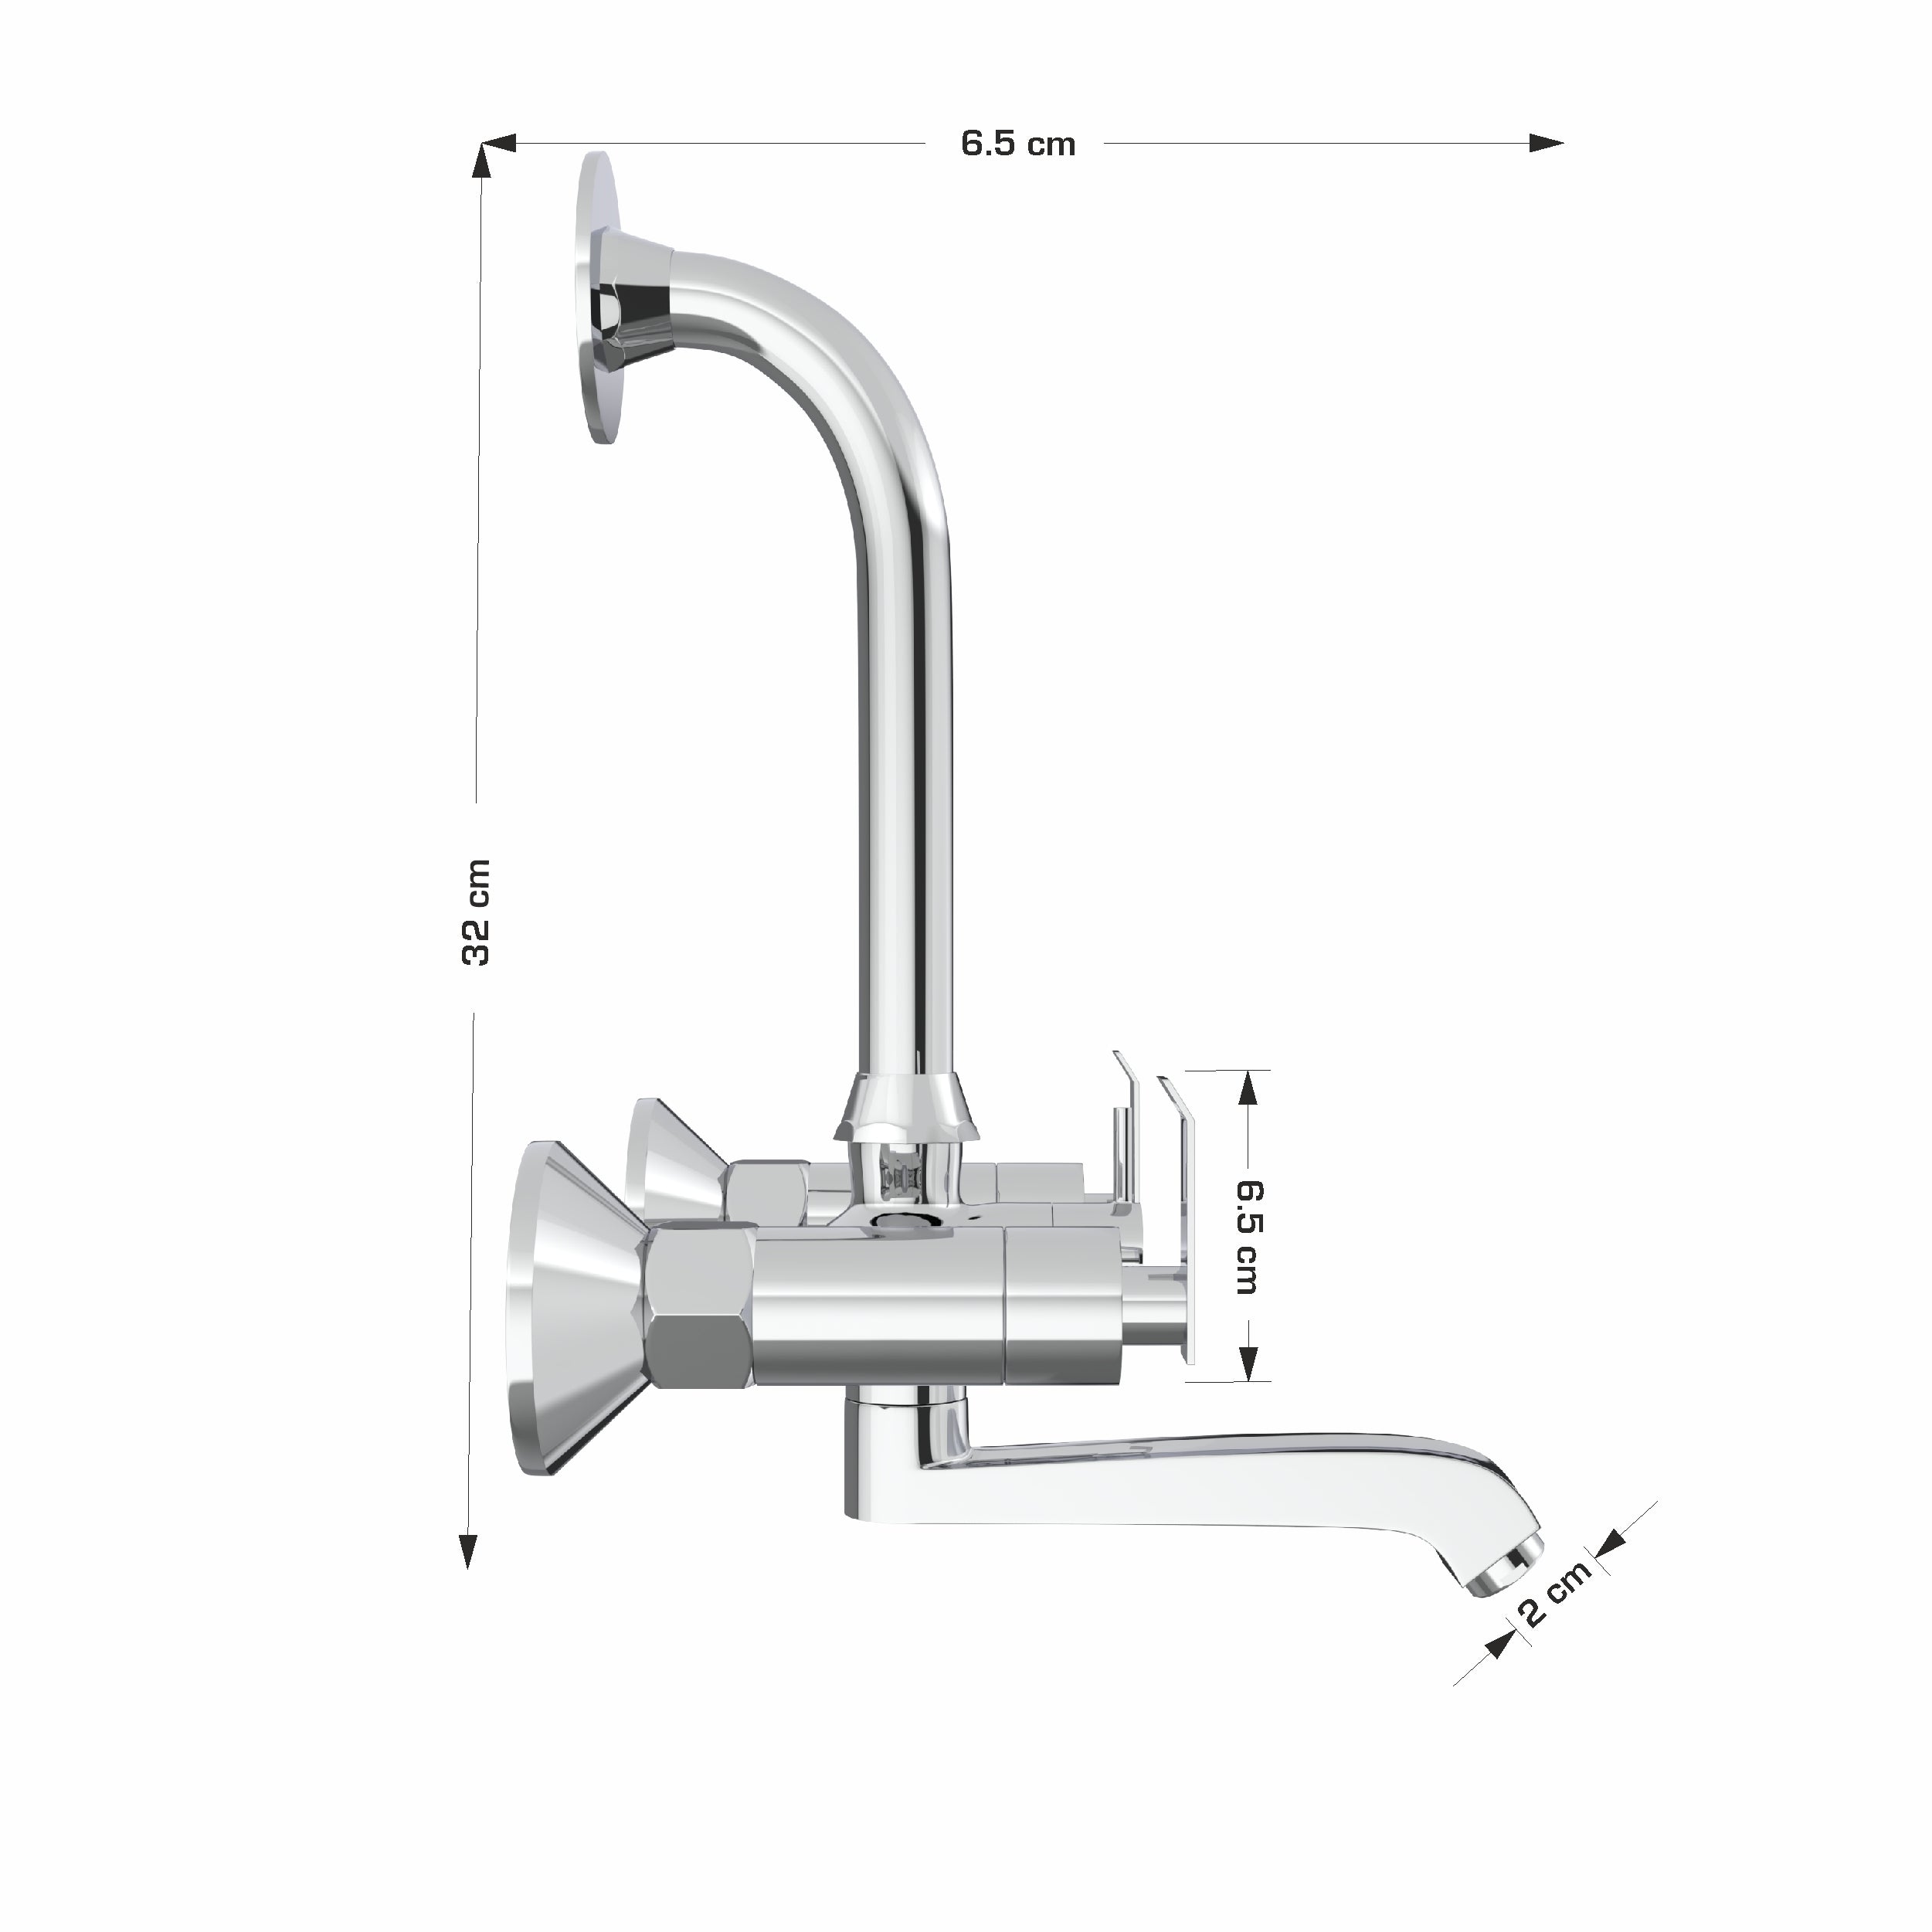 Double Handle Chrome Finish Wall Mixer tap with for Bathroom